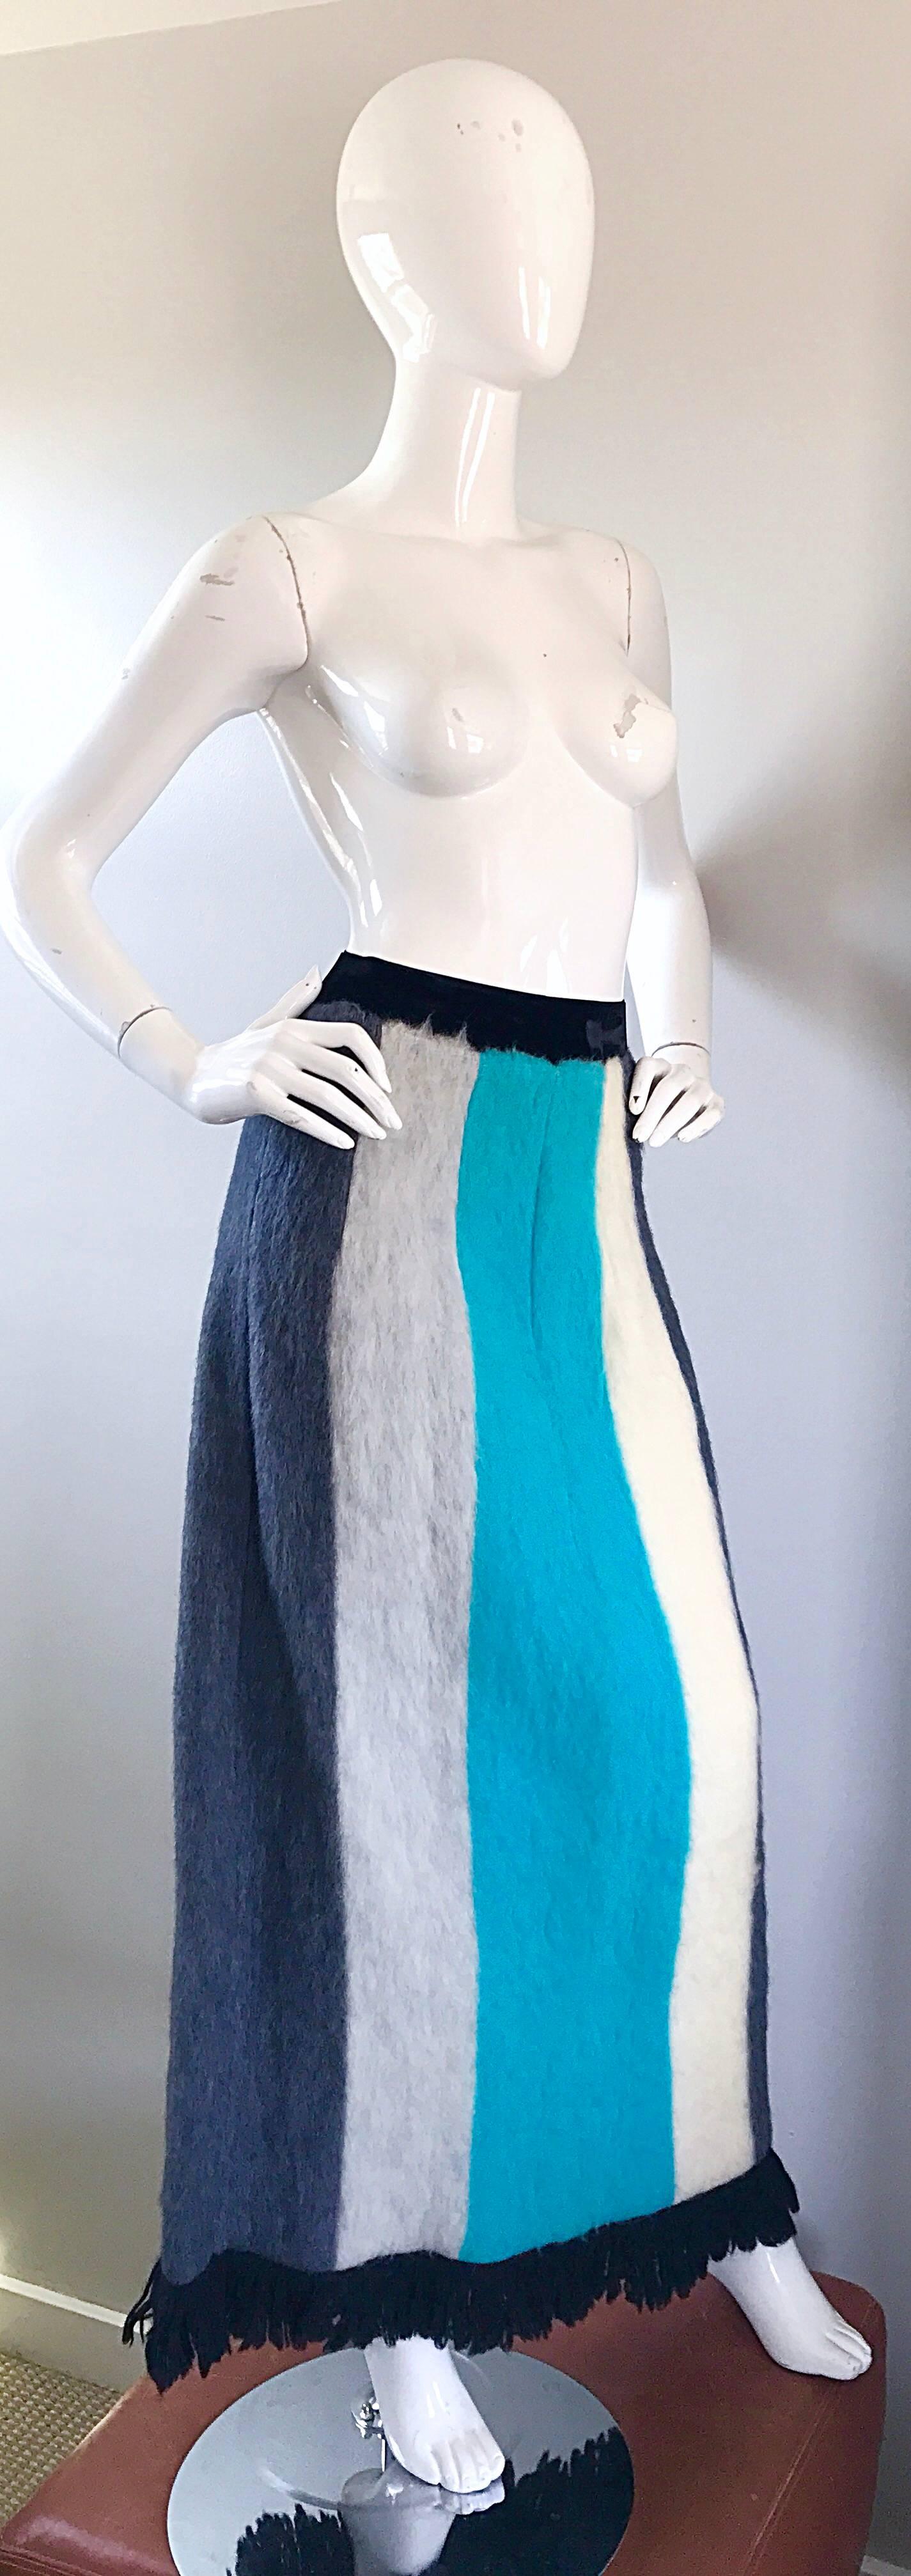 Spectacular 60s OHRBACH'S turquoise blue, ivory, heather and grey angora mohair blend striped colorblocked maxi skirt! Features a black velvet stretch waistband. Black wool fringe at the hem. Super soft fabric feel great against the skin. Fully